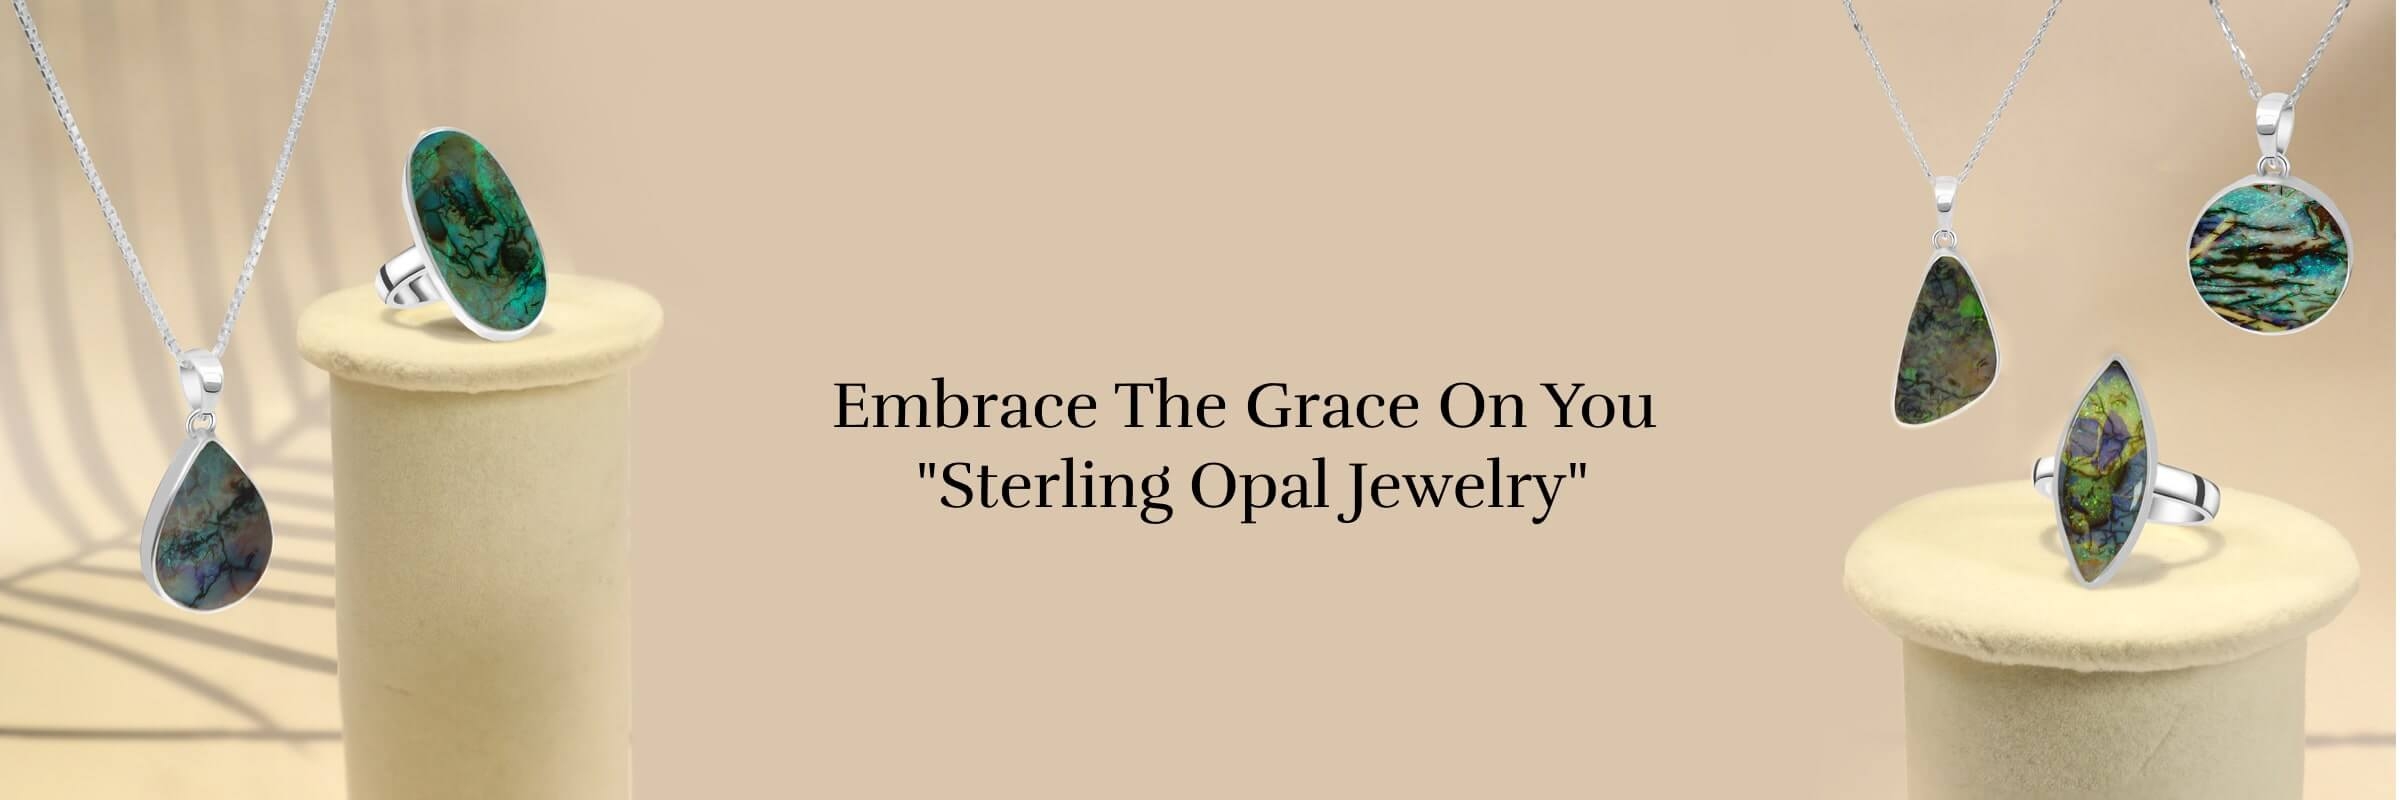 Radiant Reflections: The Beauty Of Sterling Opal Jewelry 1